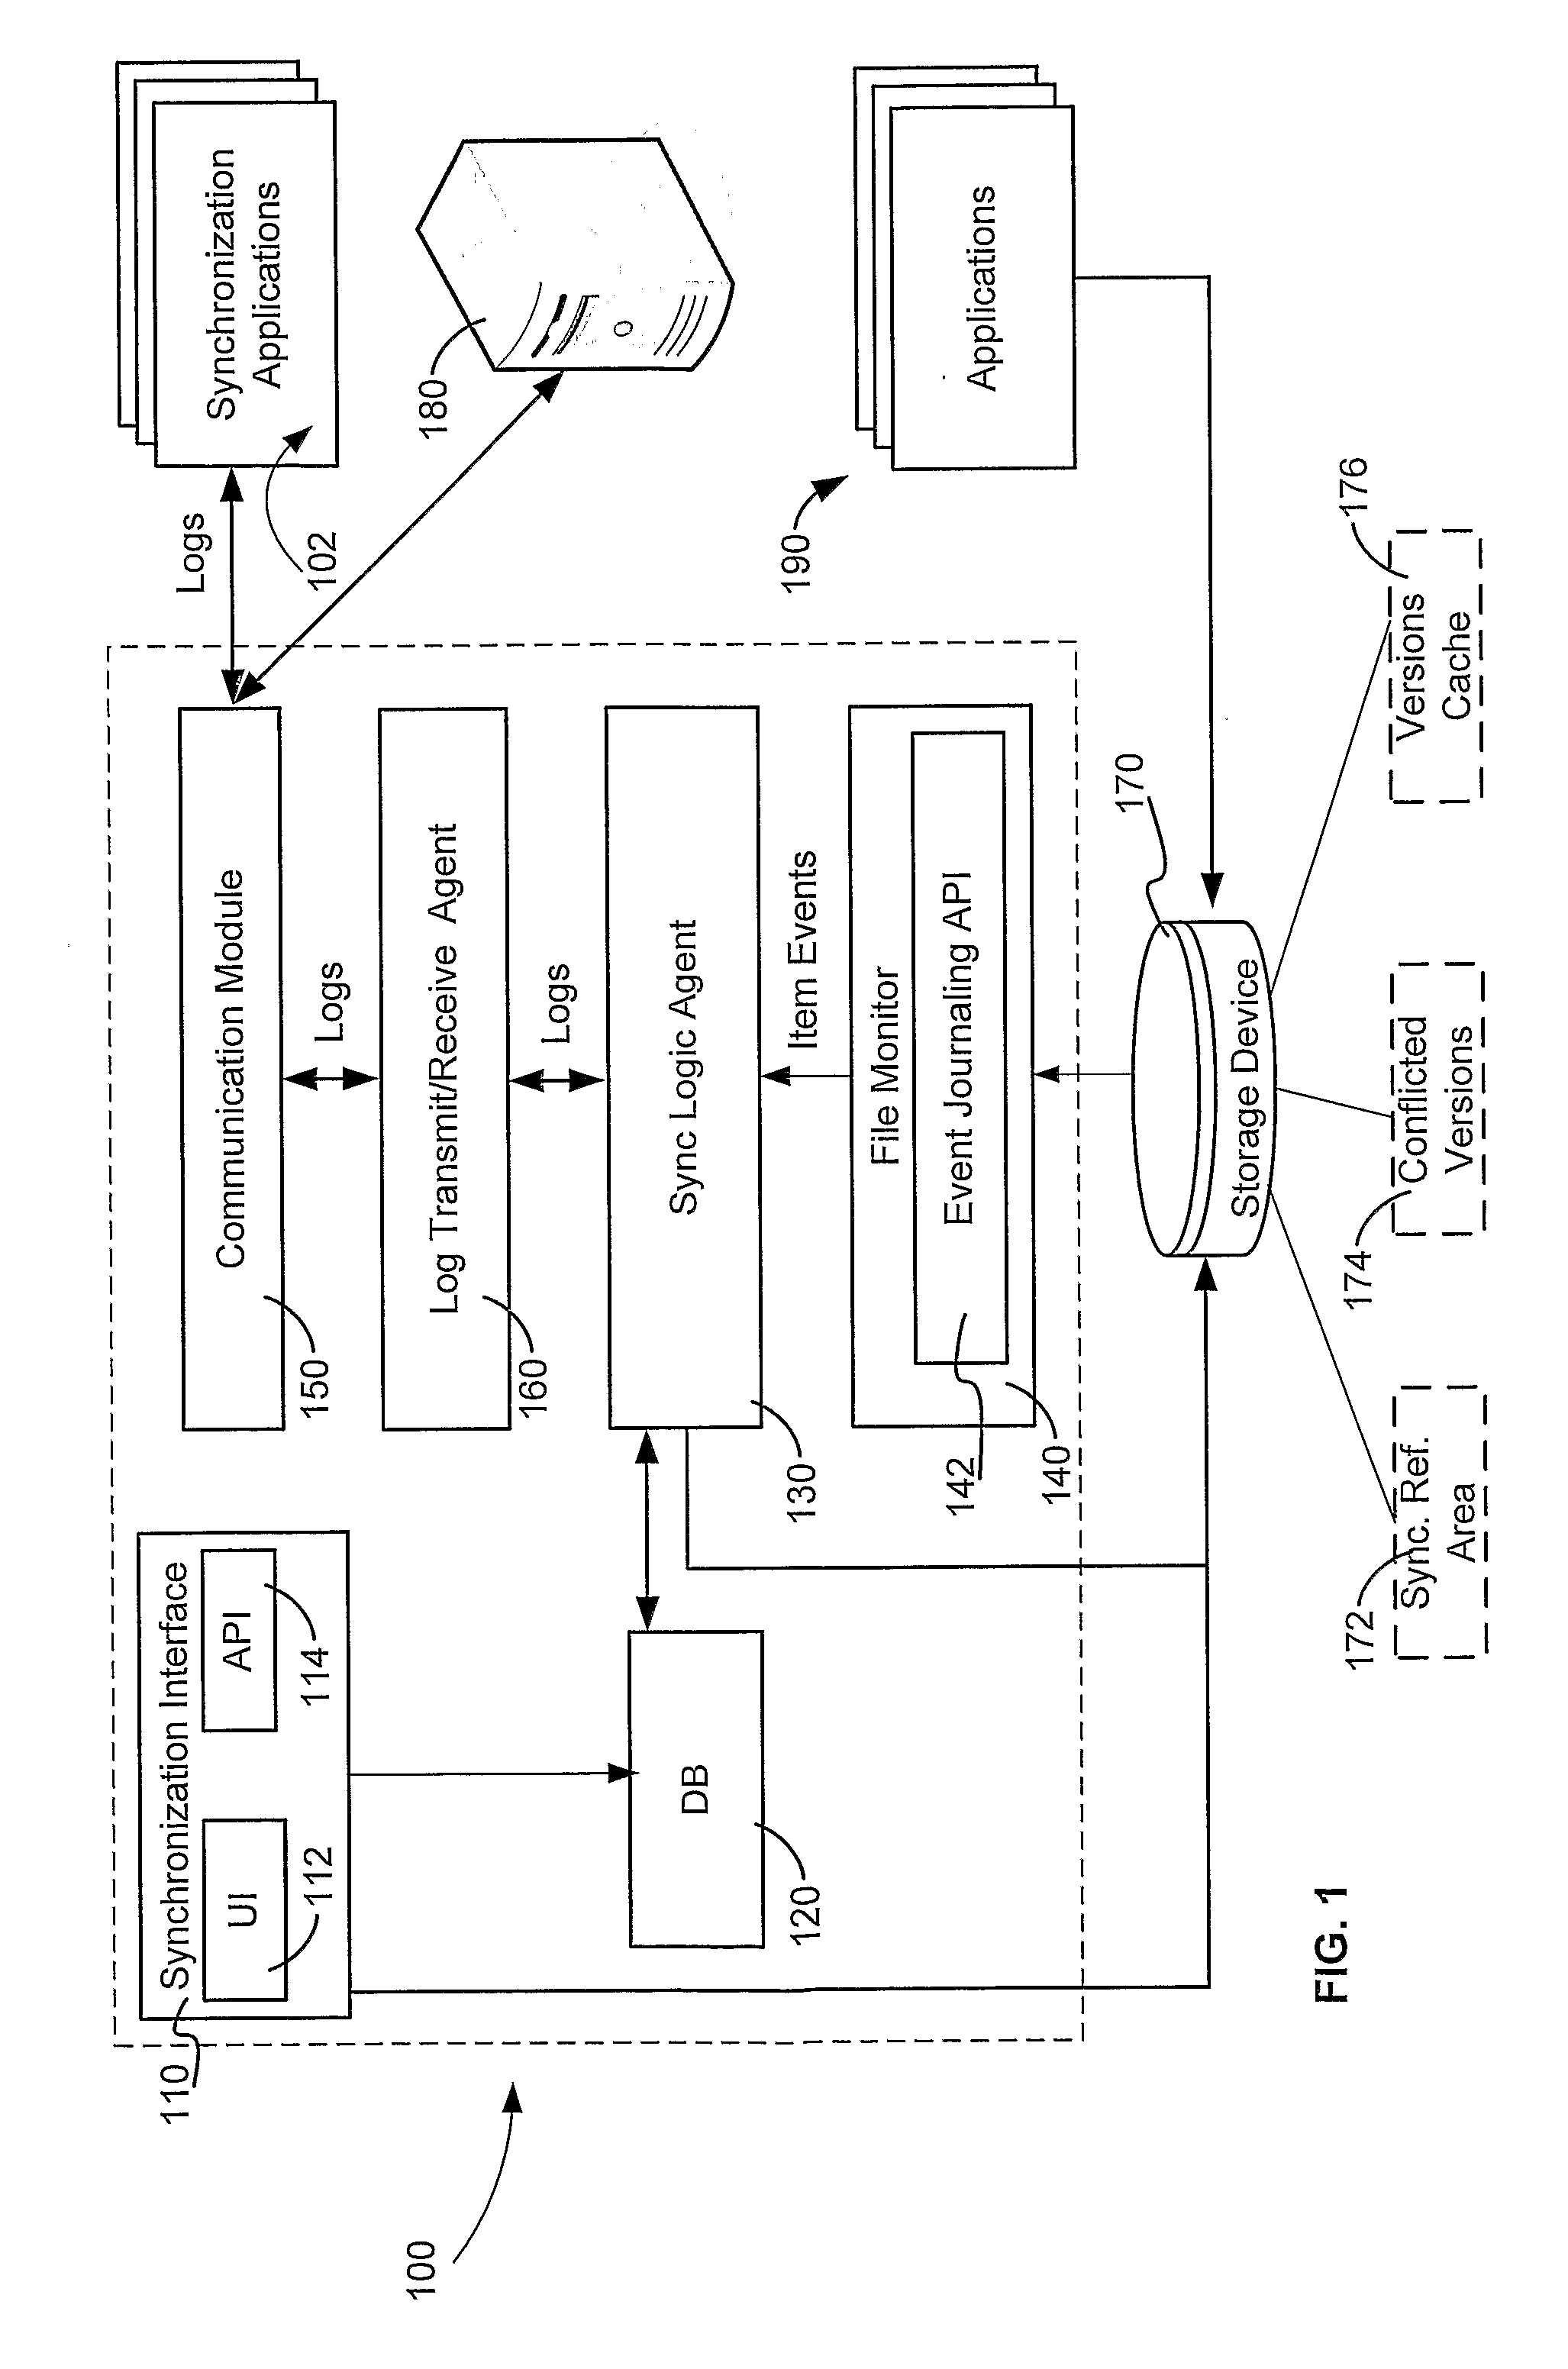 Peer to peer Synchronization system and method